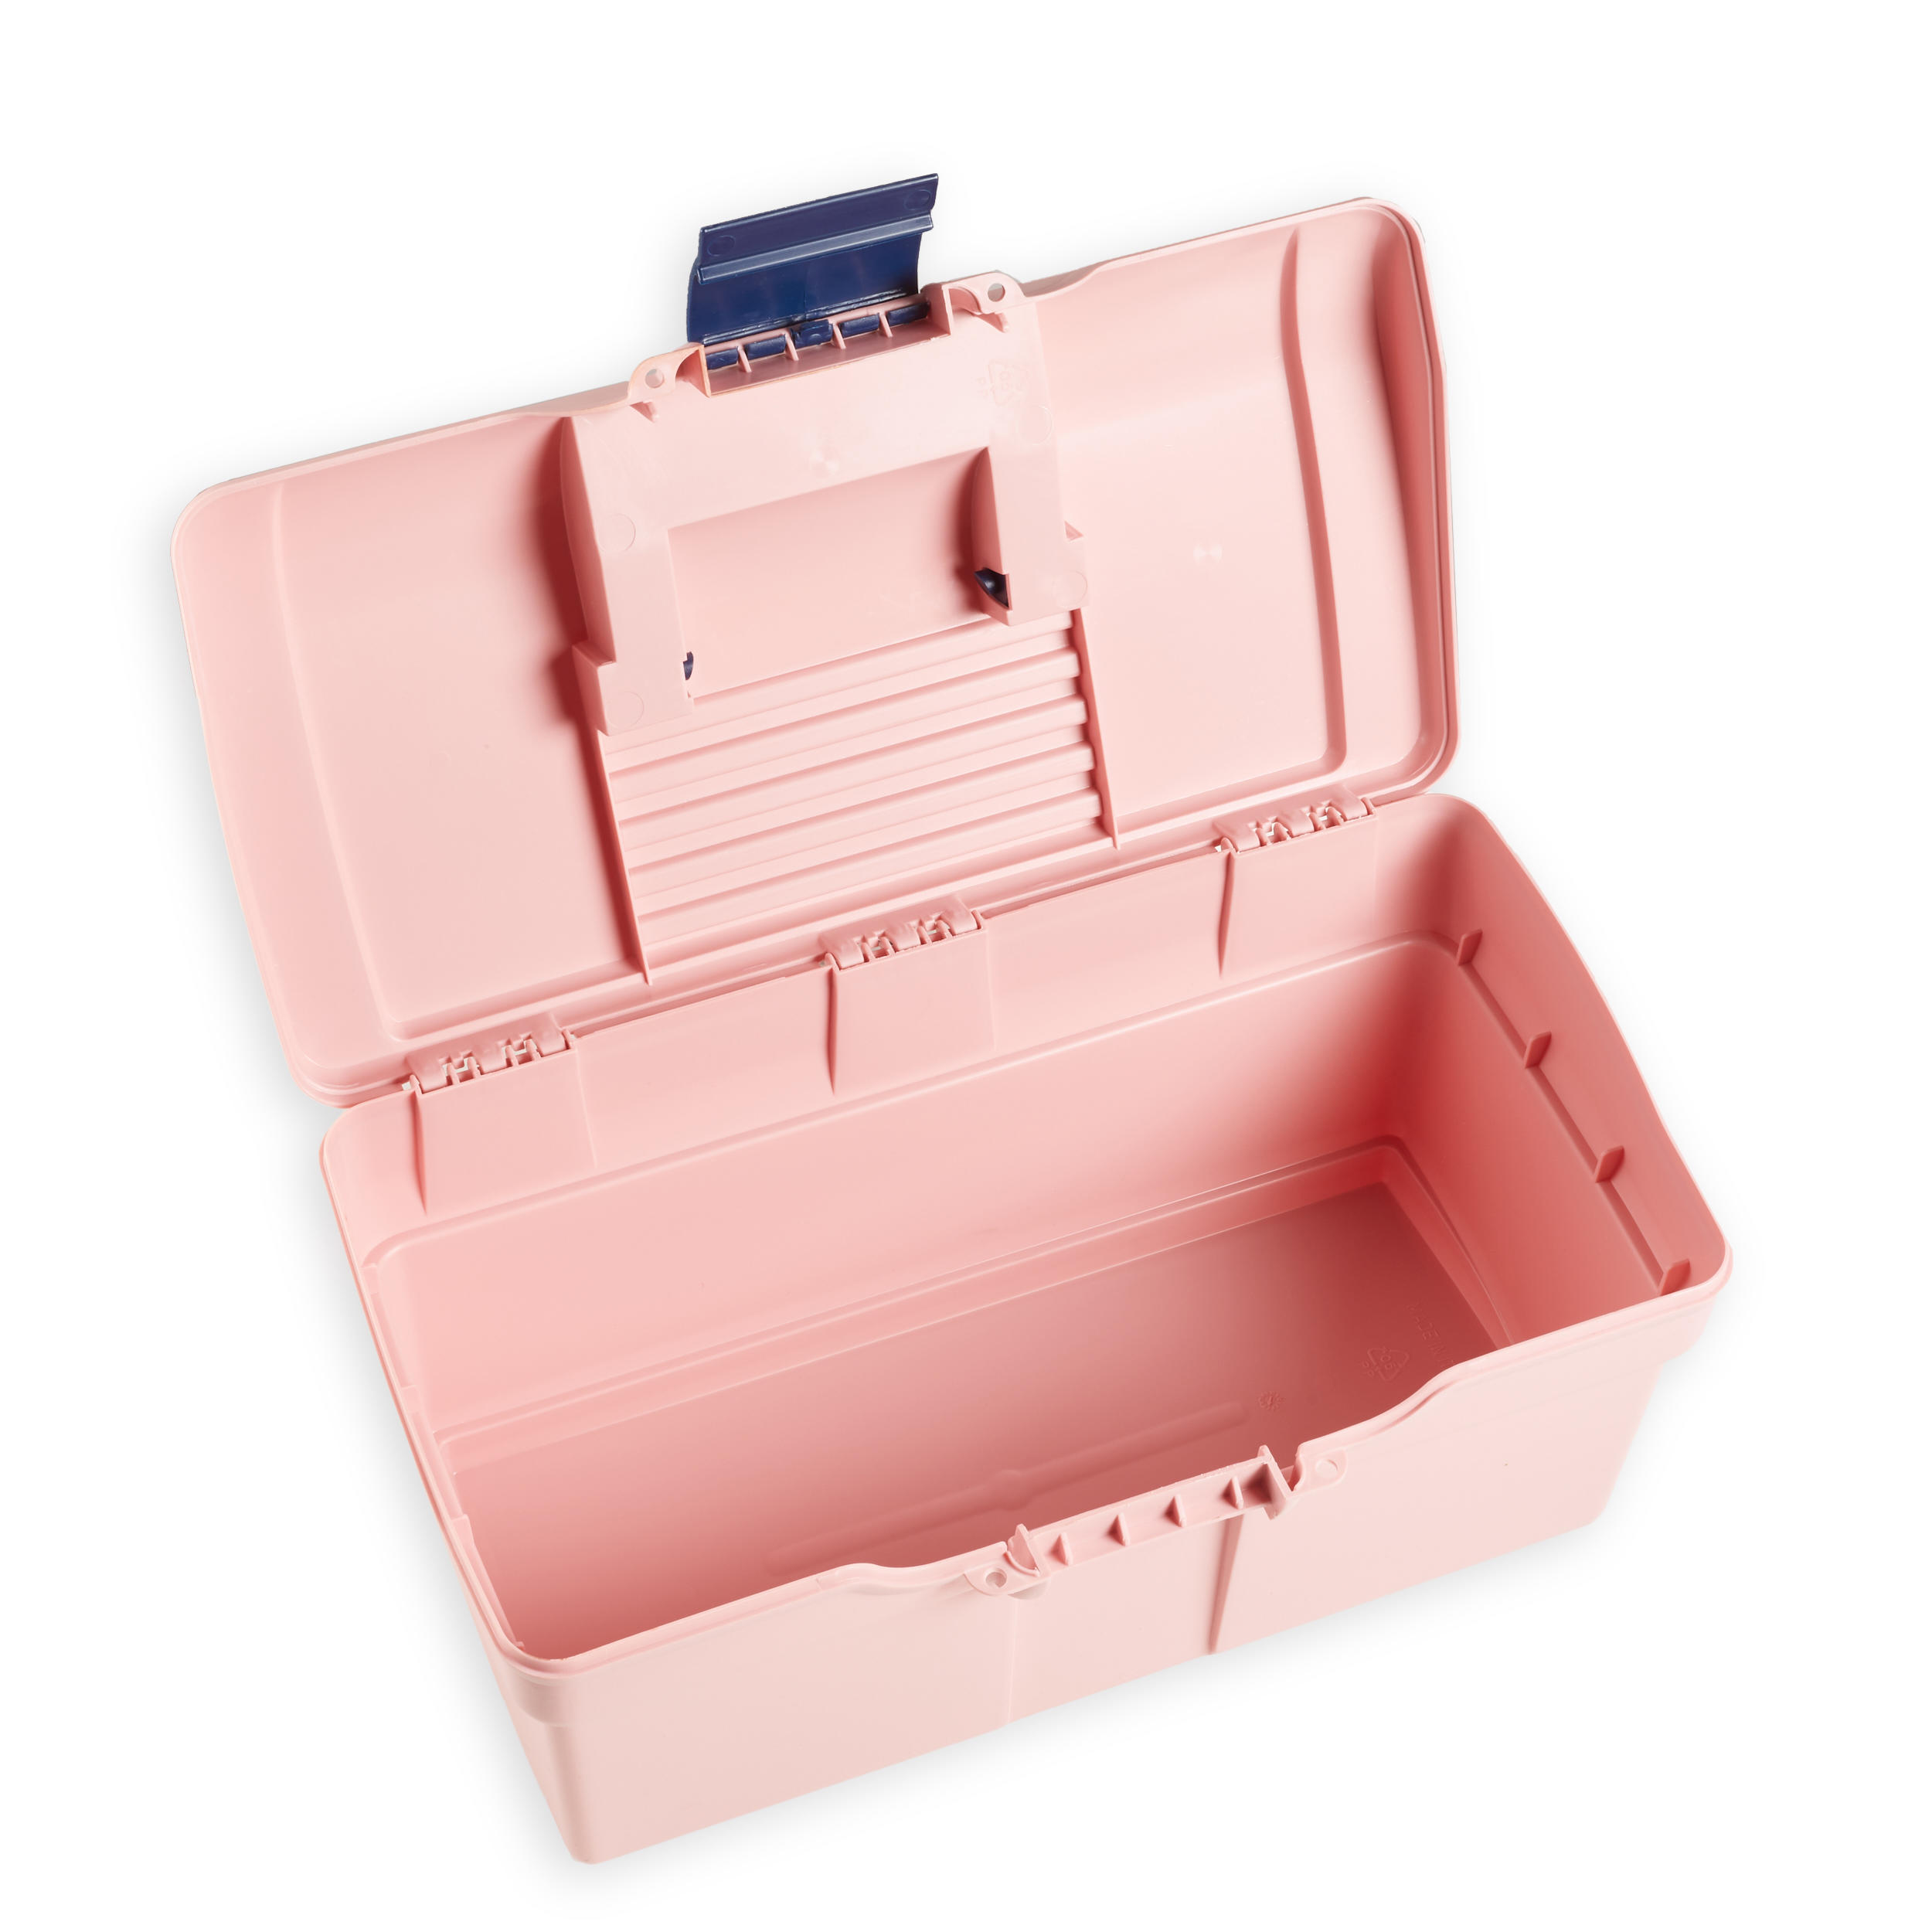 Horse Riding Grooming Case 300 - Pink / Navy 4/5